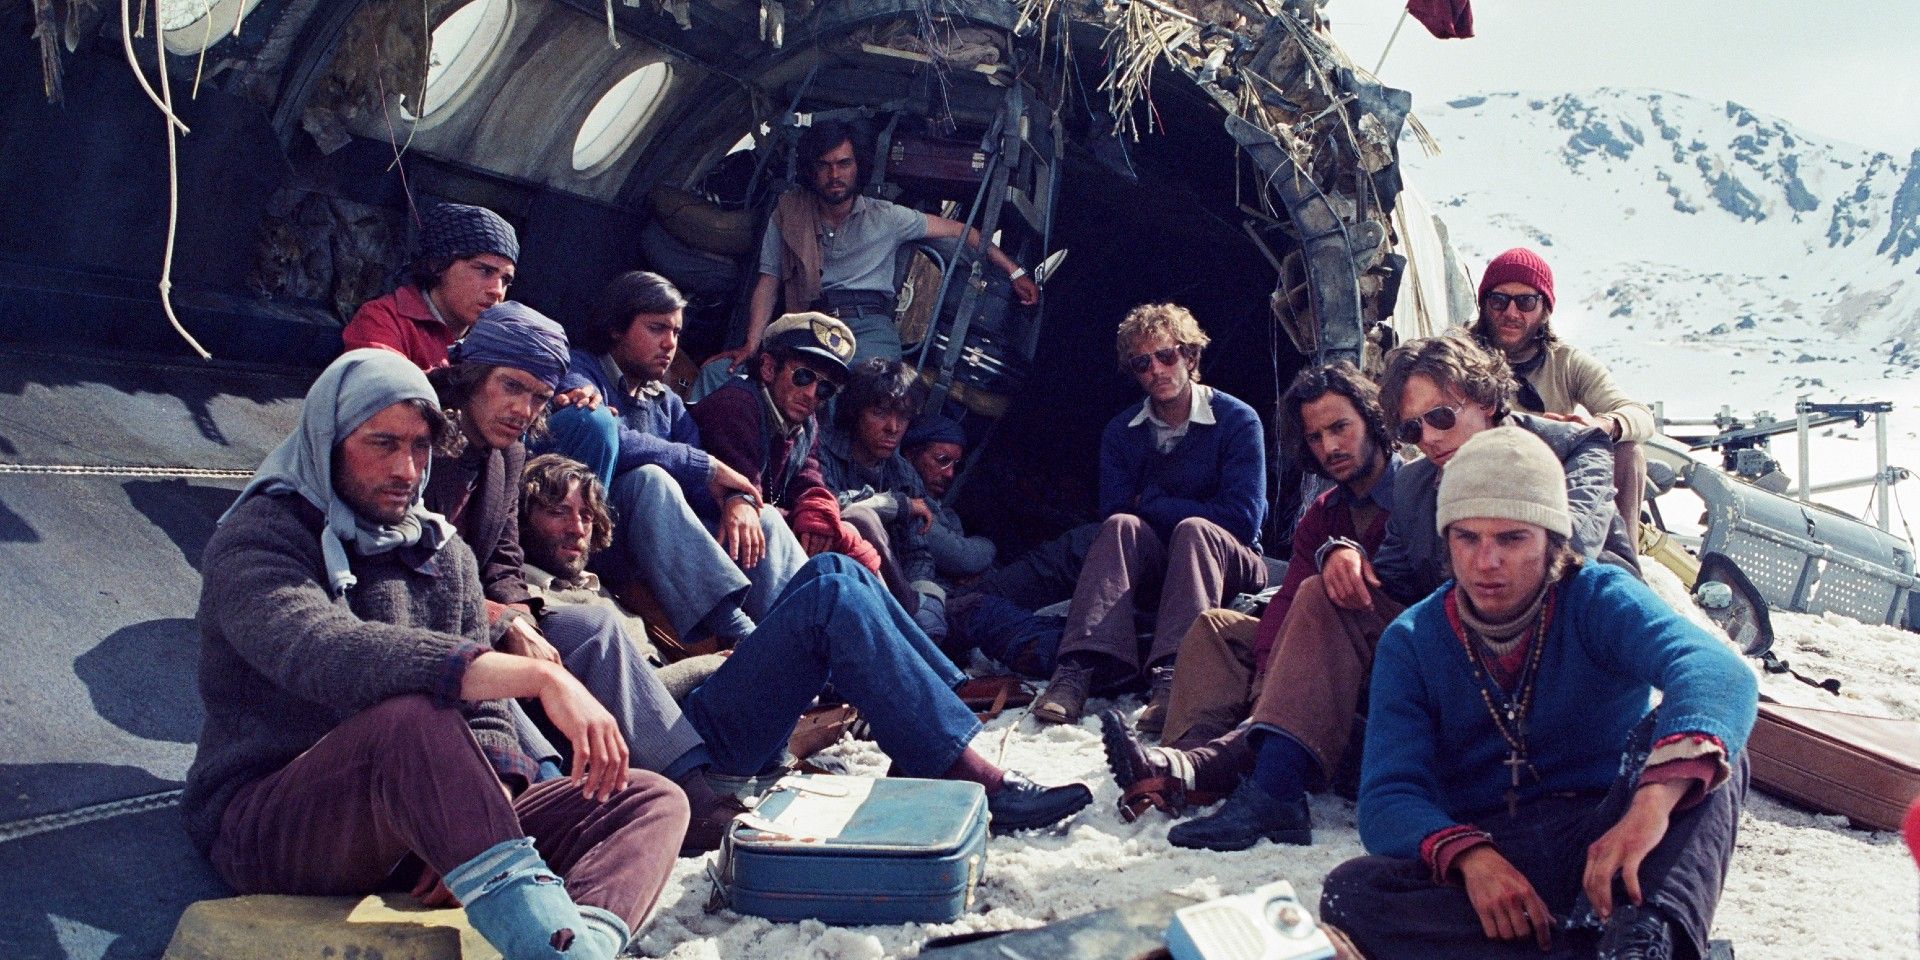 the survivors sitting in and around the broken fuselage in Society of the Snow